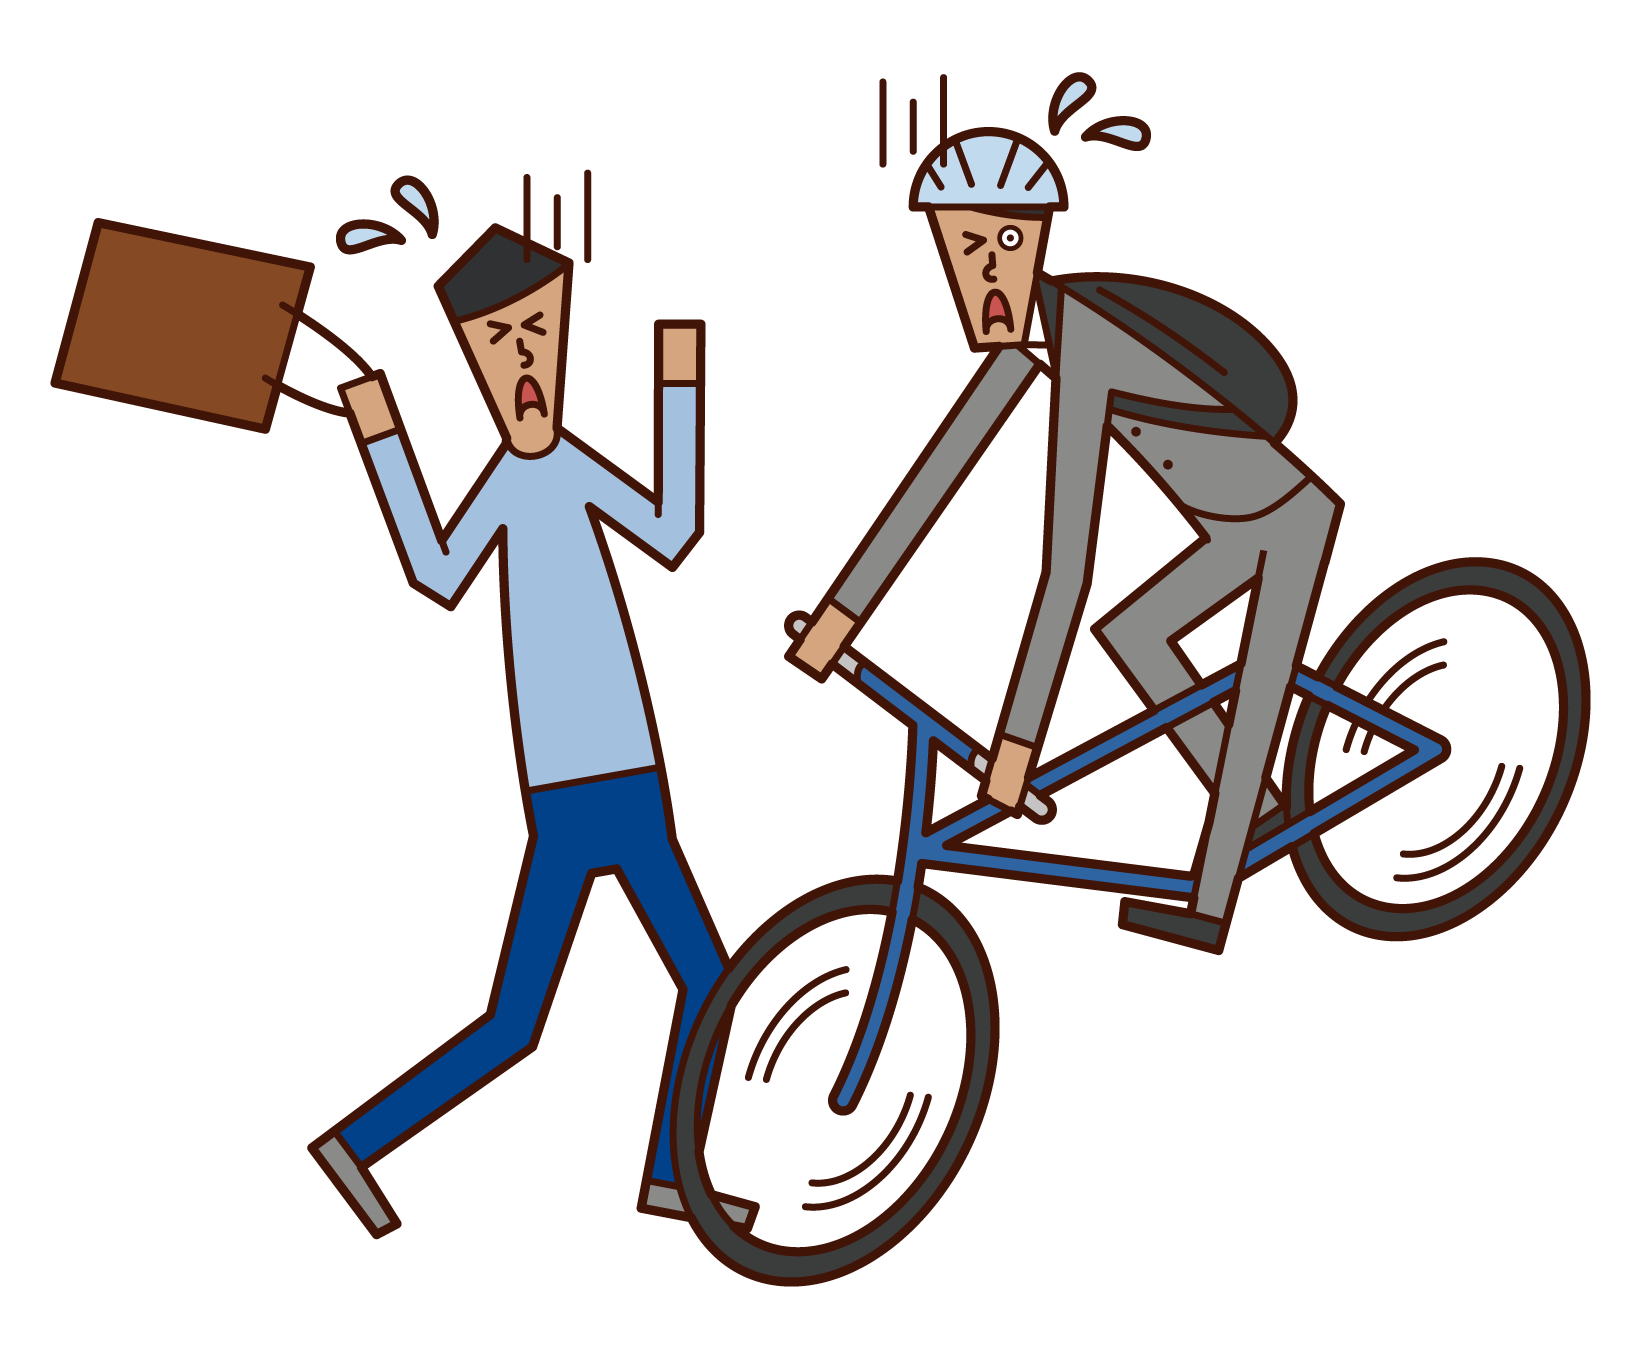 Illustration of a man who causes a crash on a bicycle